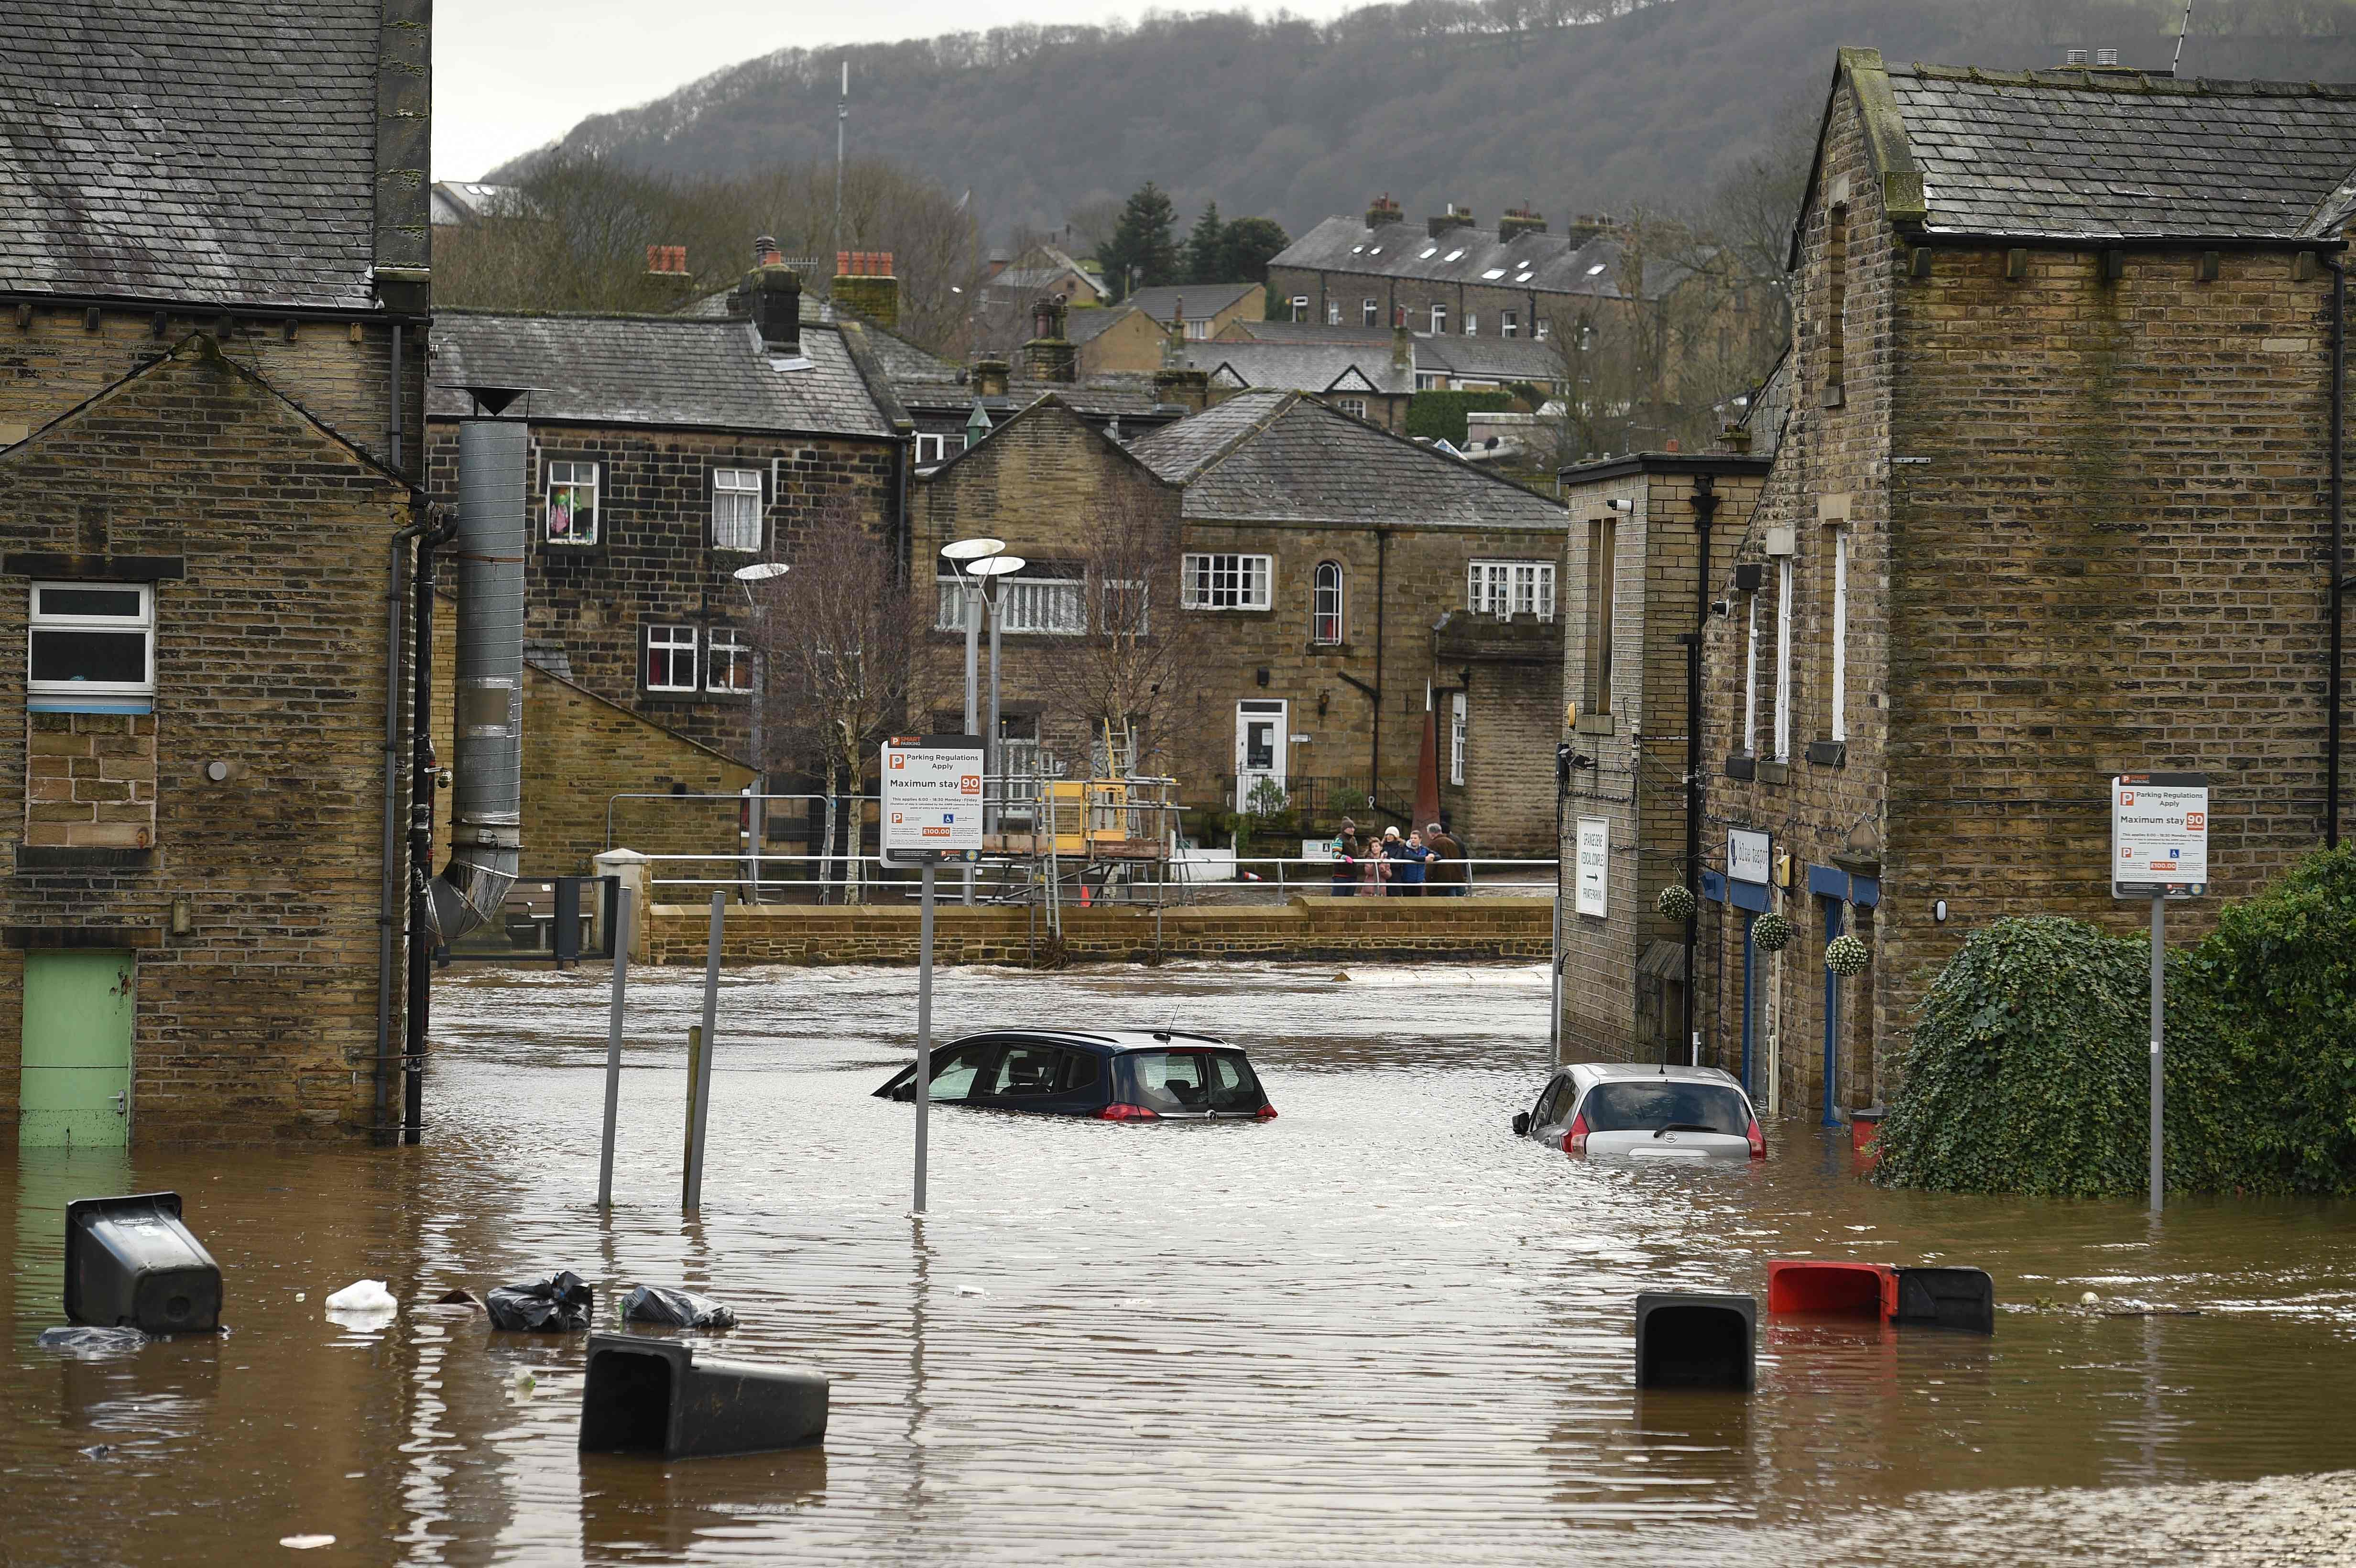 Cars are seen submerged as flood water covers the roads and car parks in Mytholmroyd, northern England, on February 9, 2020, after the River Calder burst its banks as Storm Ciara swept over the country.. (AFP Photo)